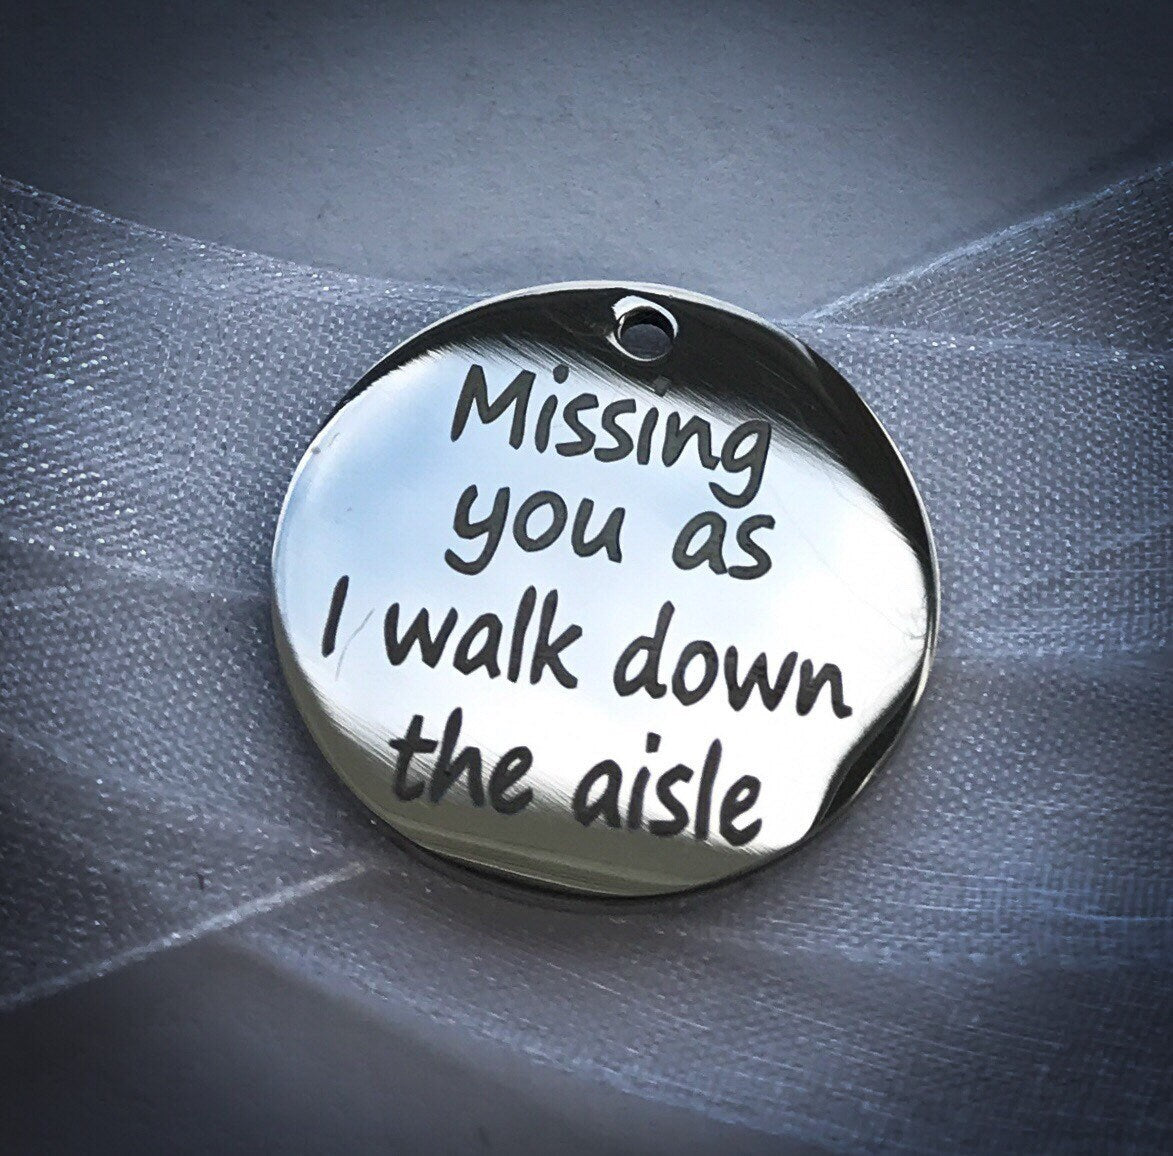 Missing you as I walk down the aisle Wedding Memory charm to hang on wedding bouquet for Bride - Silver Keepsake something blue